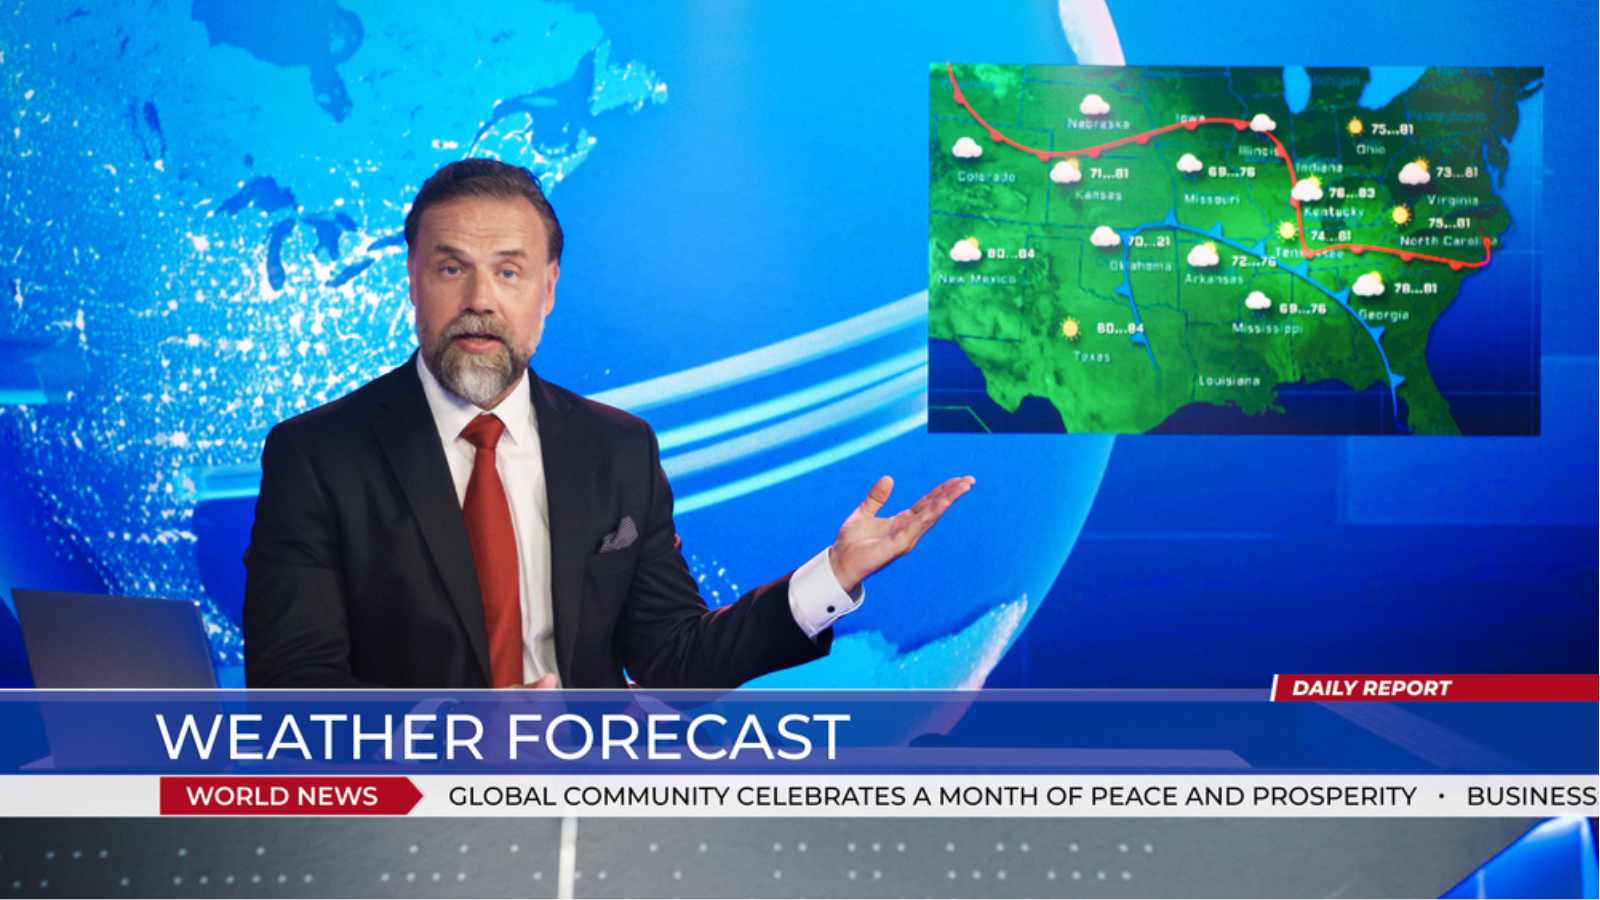 News about weather